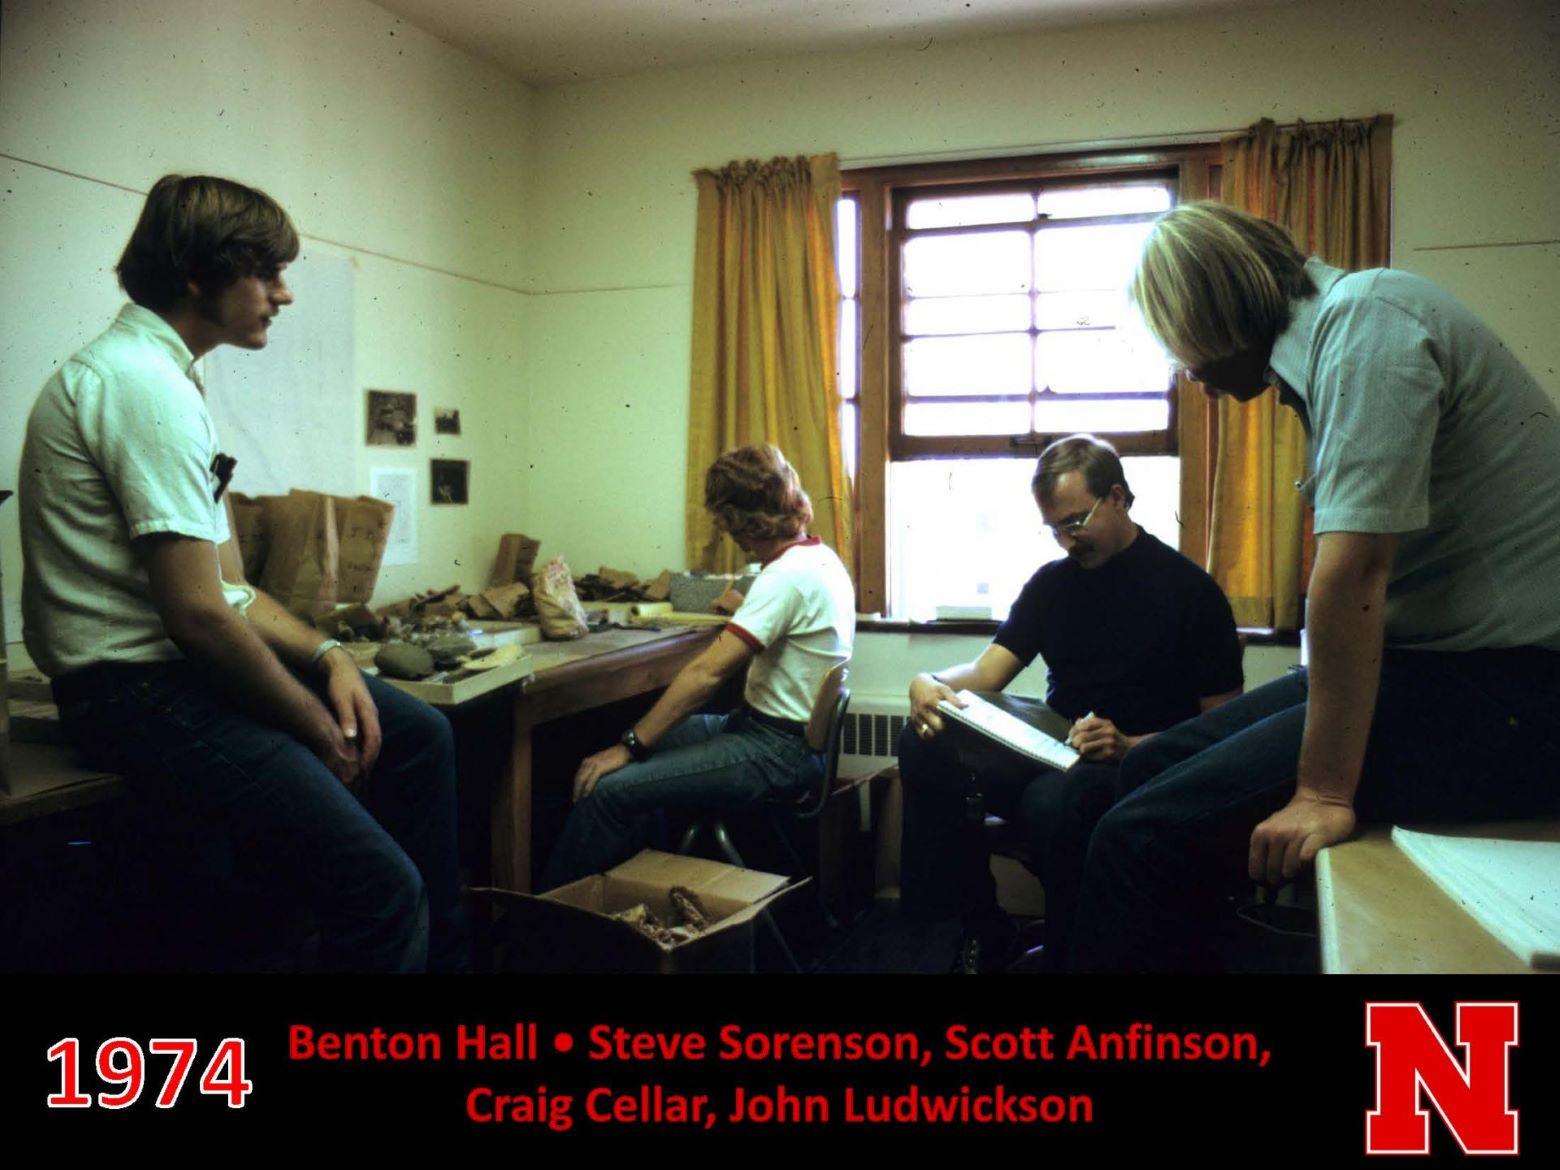 Student working in Benton Hall with collections in 1974